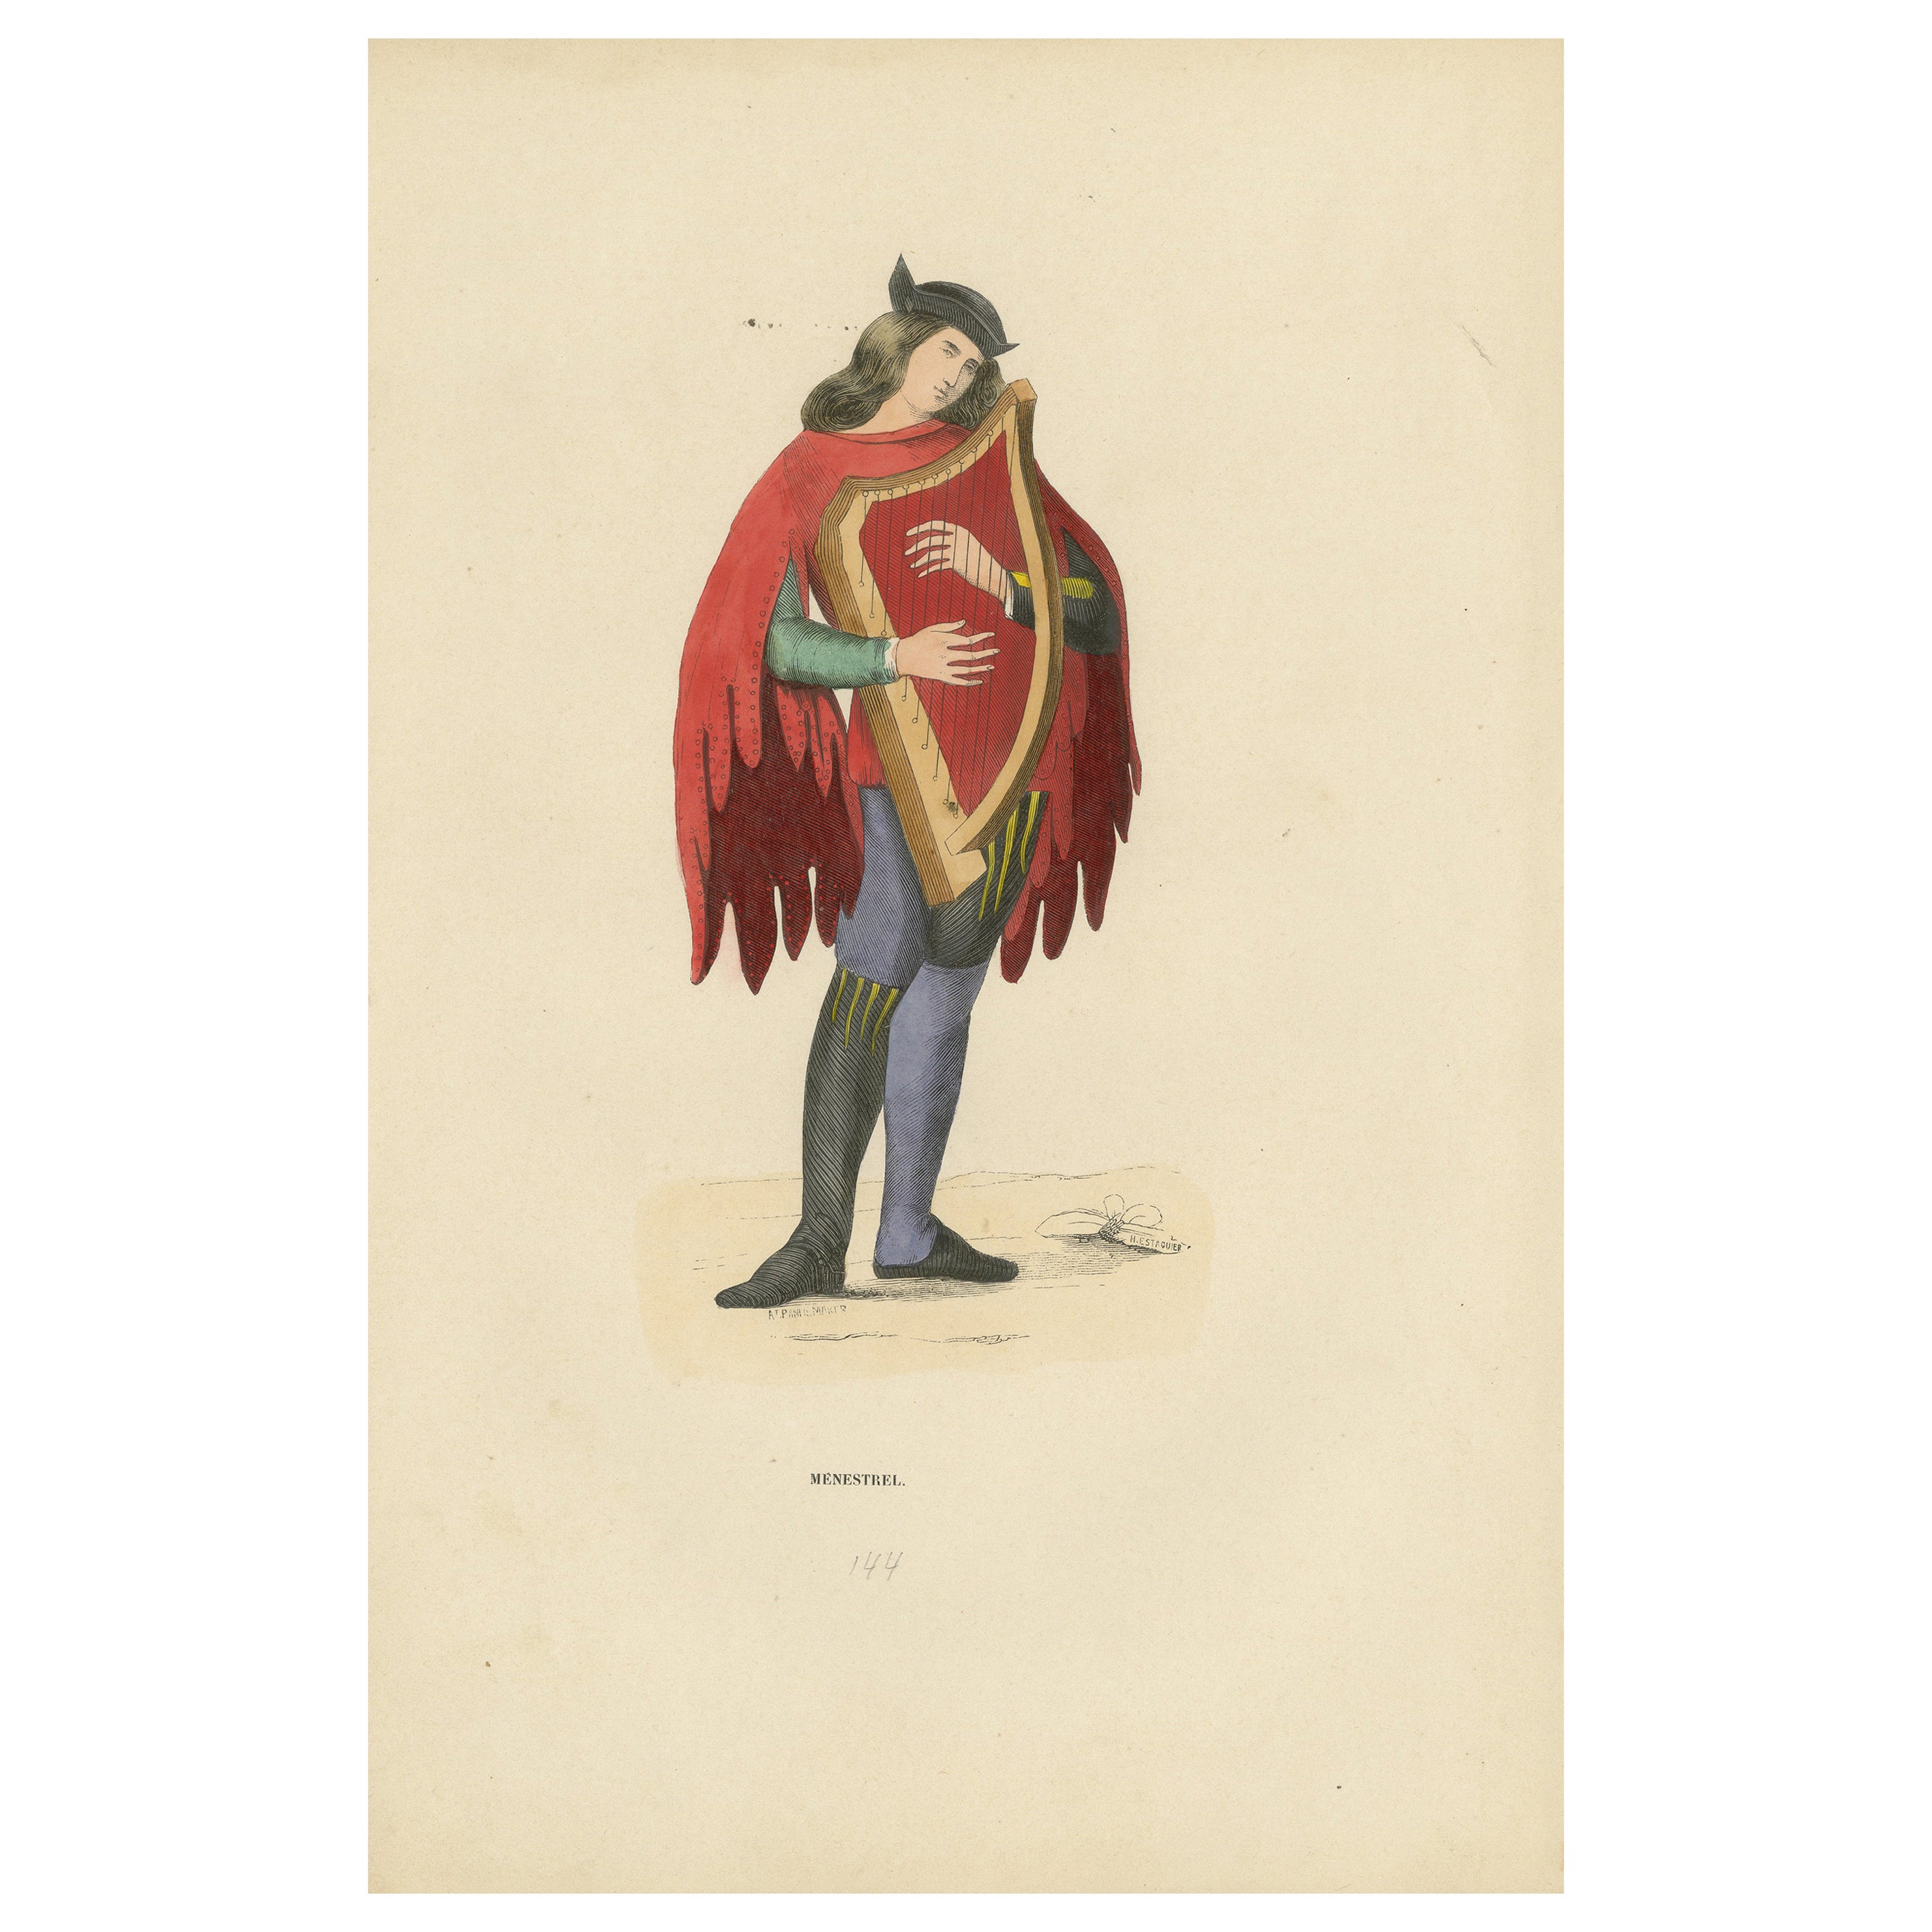 The Melancholic Minstrel: A Musical Performer's Attire, Published in 1847